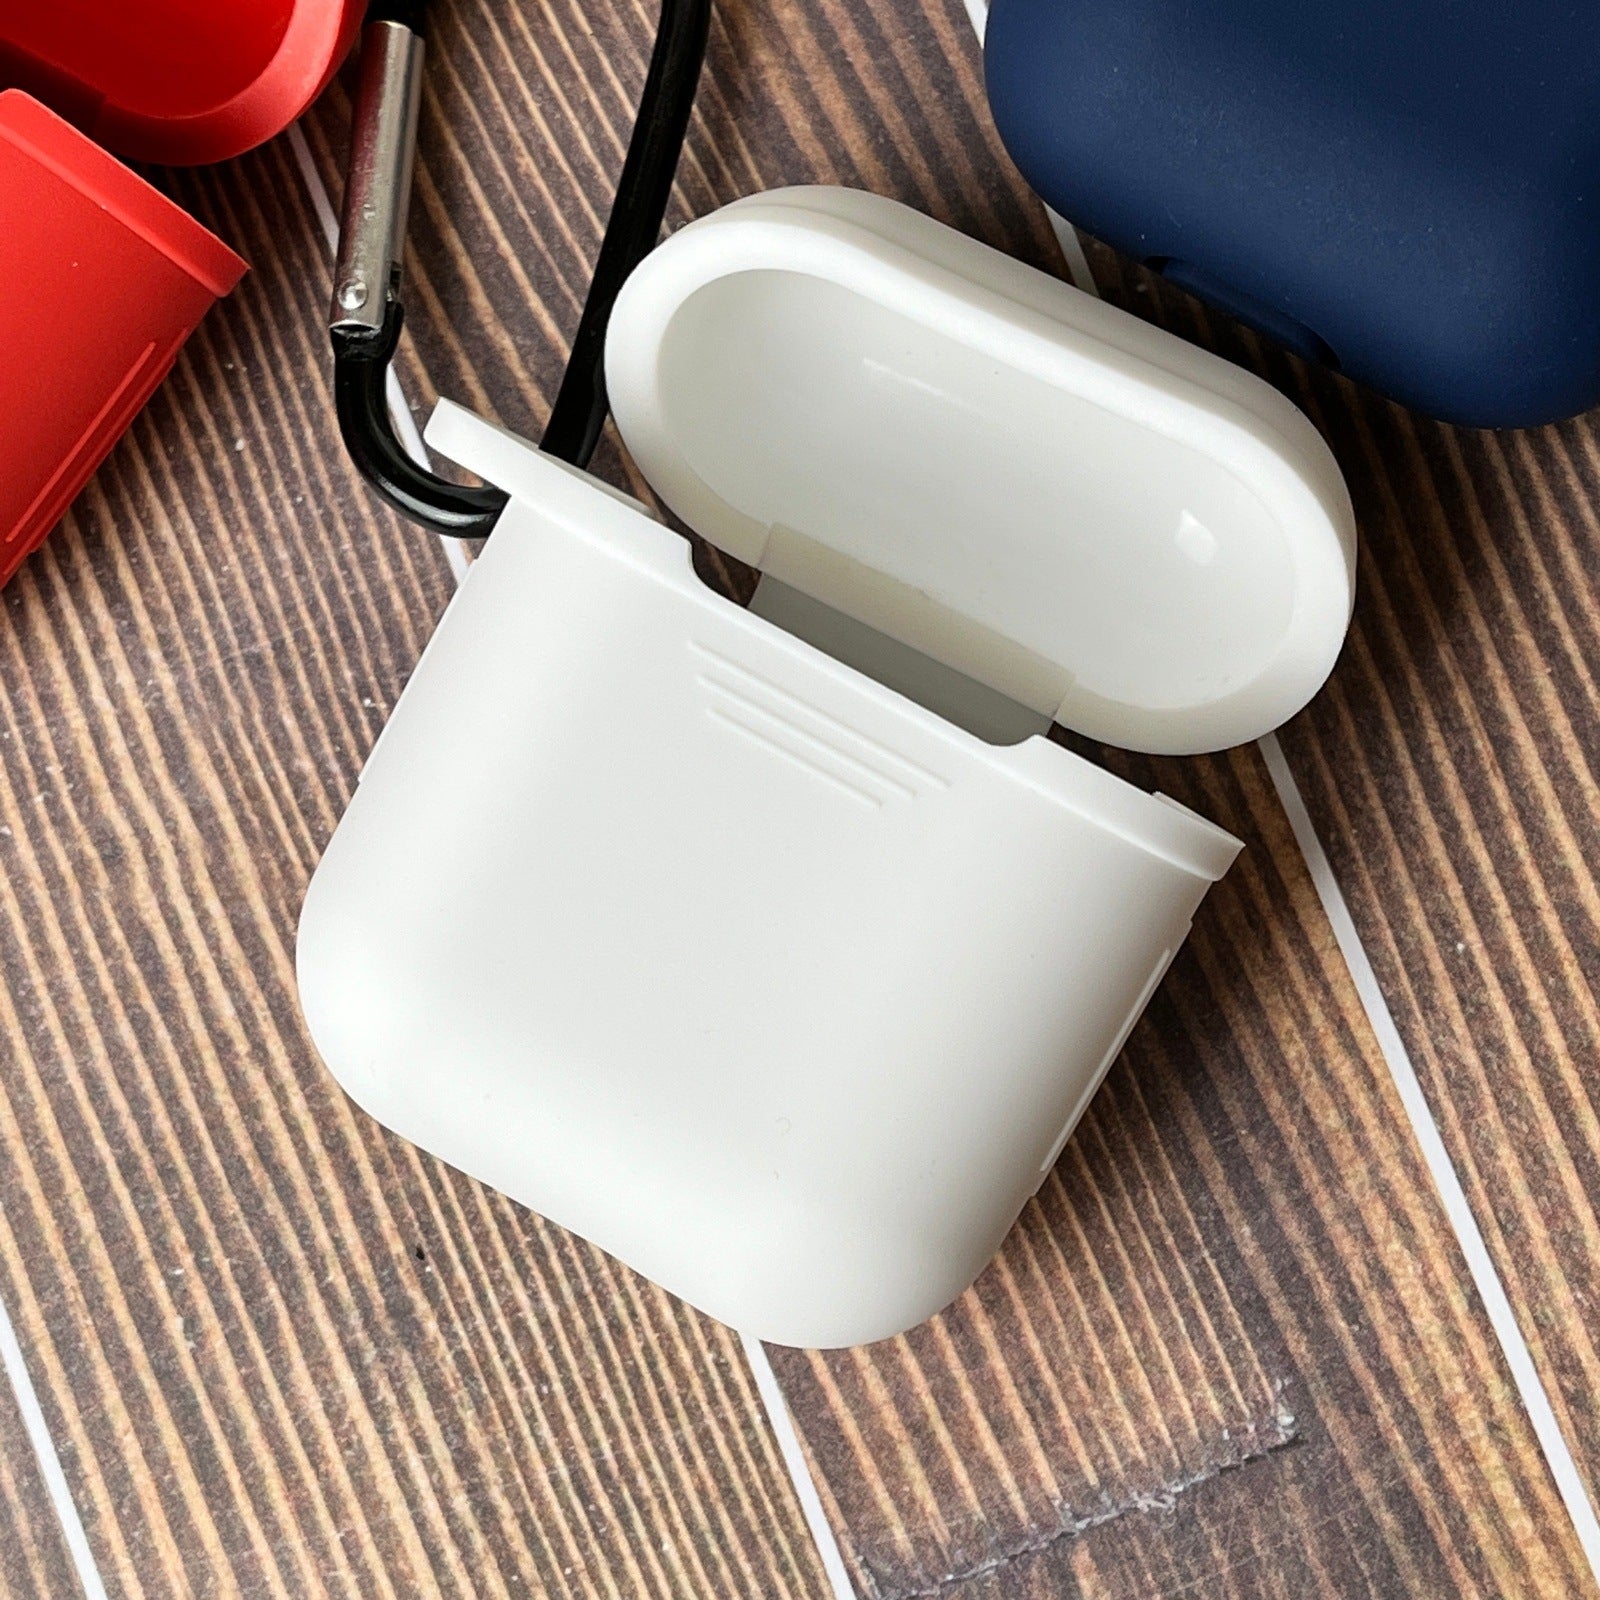 Silicone Airpod Case for Generation 1 or 2 with Clip - CLEARANCE